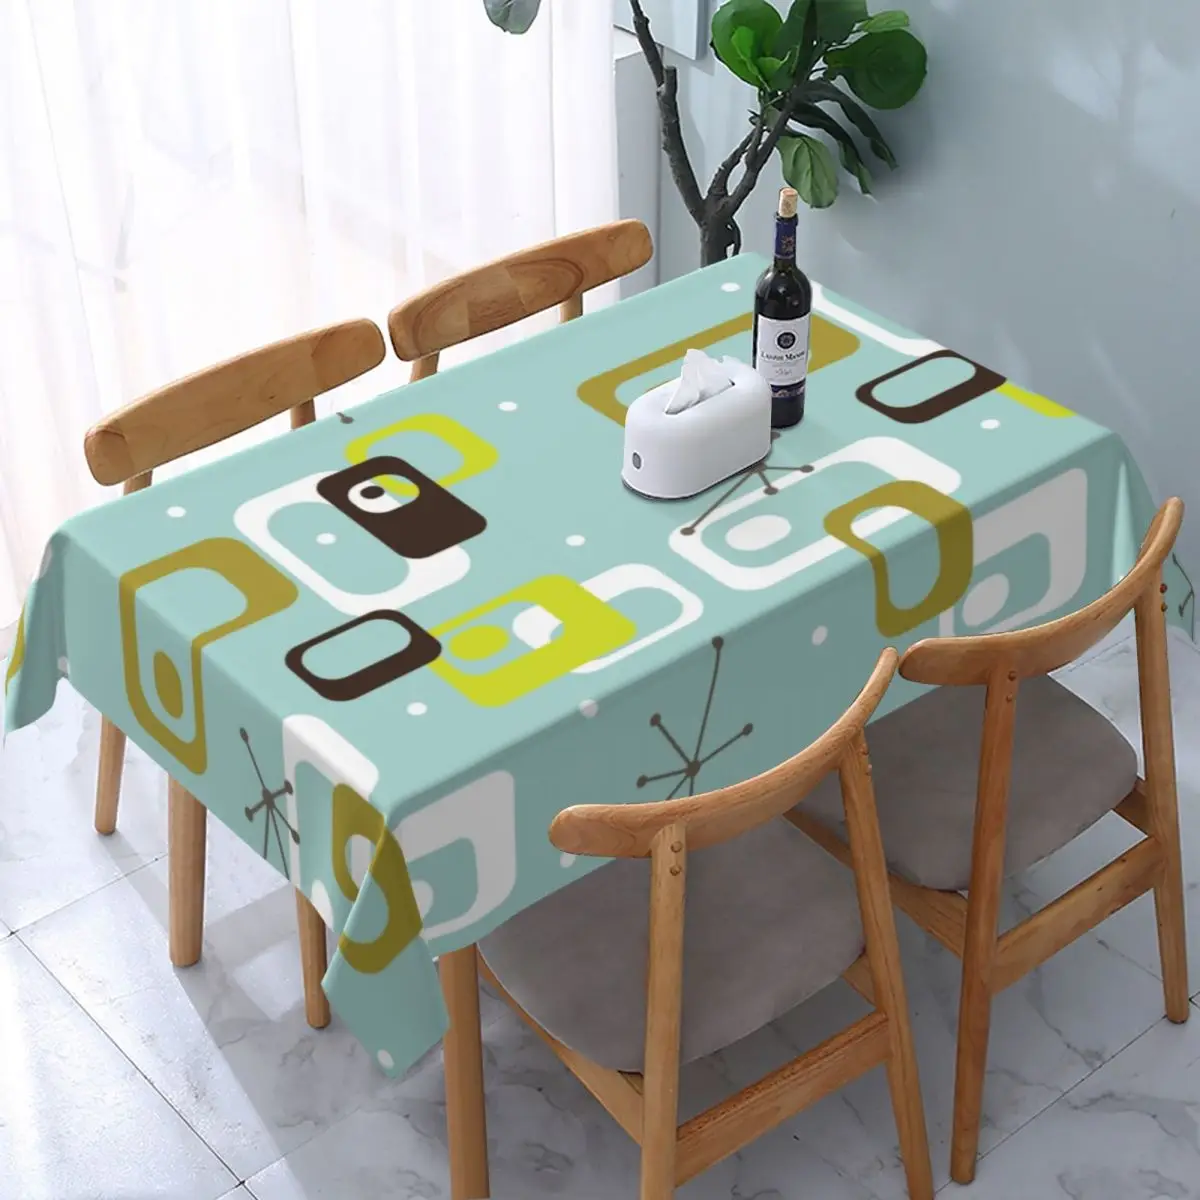 

Waterproof Minimalist Geometric Mid Century Atomic Tablecloth Backing Elastic Edge Table Cover Modern Abstract Table Cloth